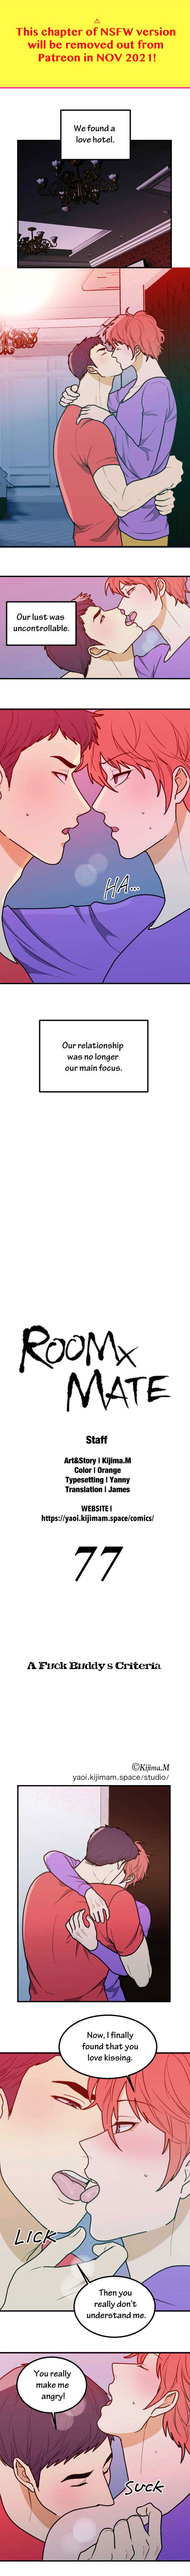 Roomxmate - Page 2